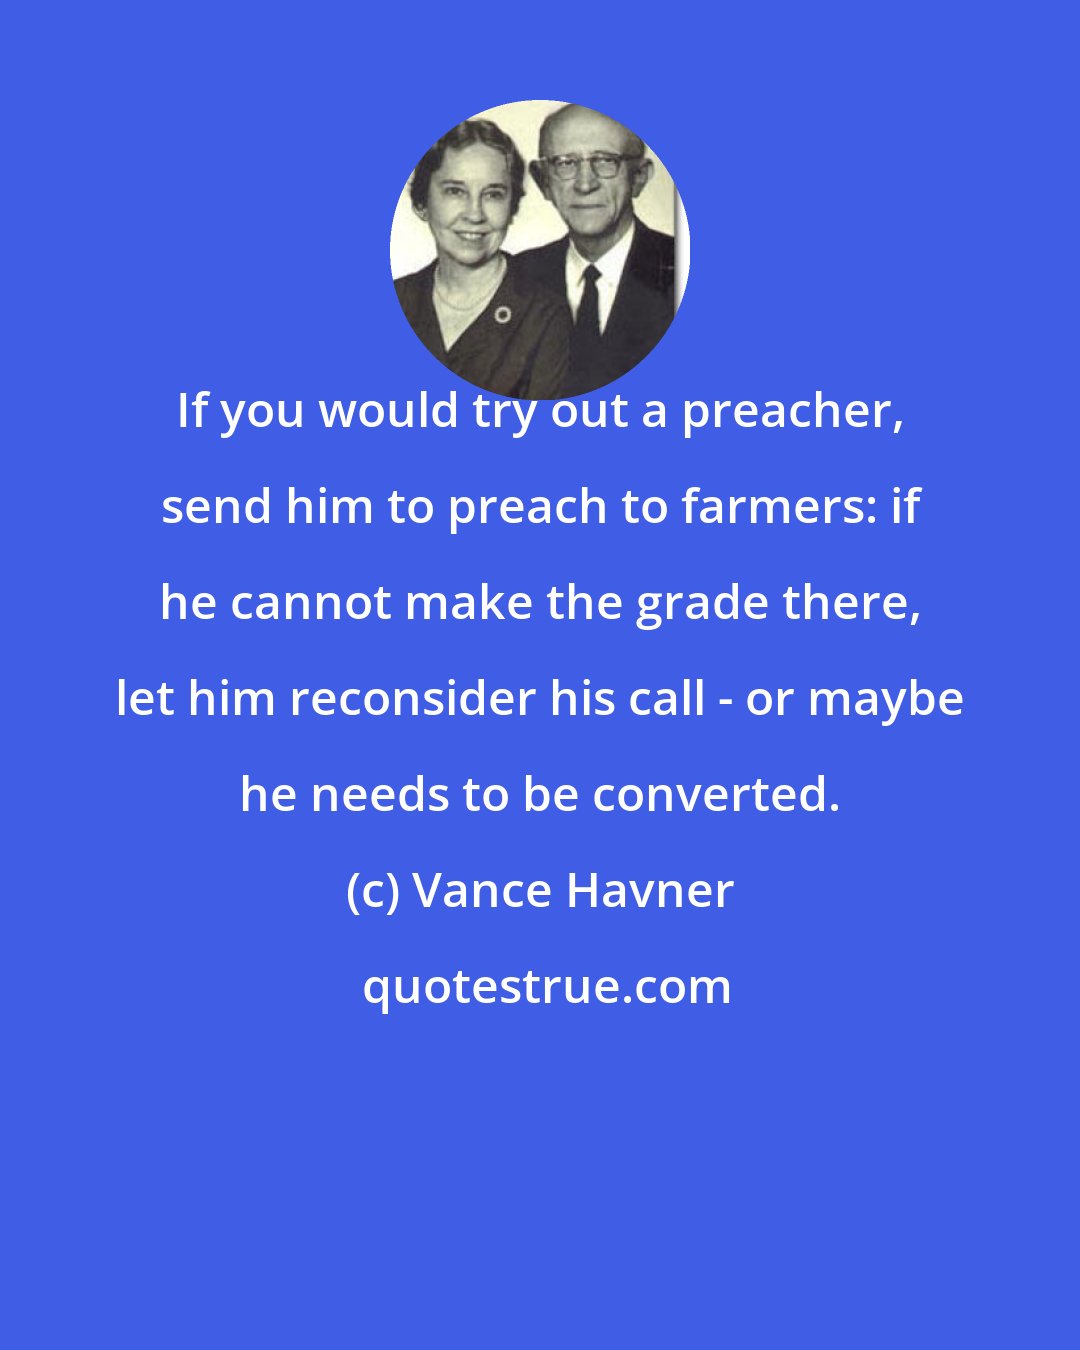 Vance Havner: If you would try out a preacher, send him to preach to farmers: if he cannot make the grade there, let him reconsider his call - or maybe he needs to be converted.